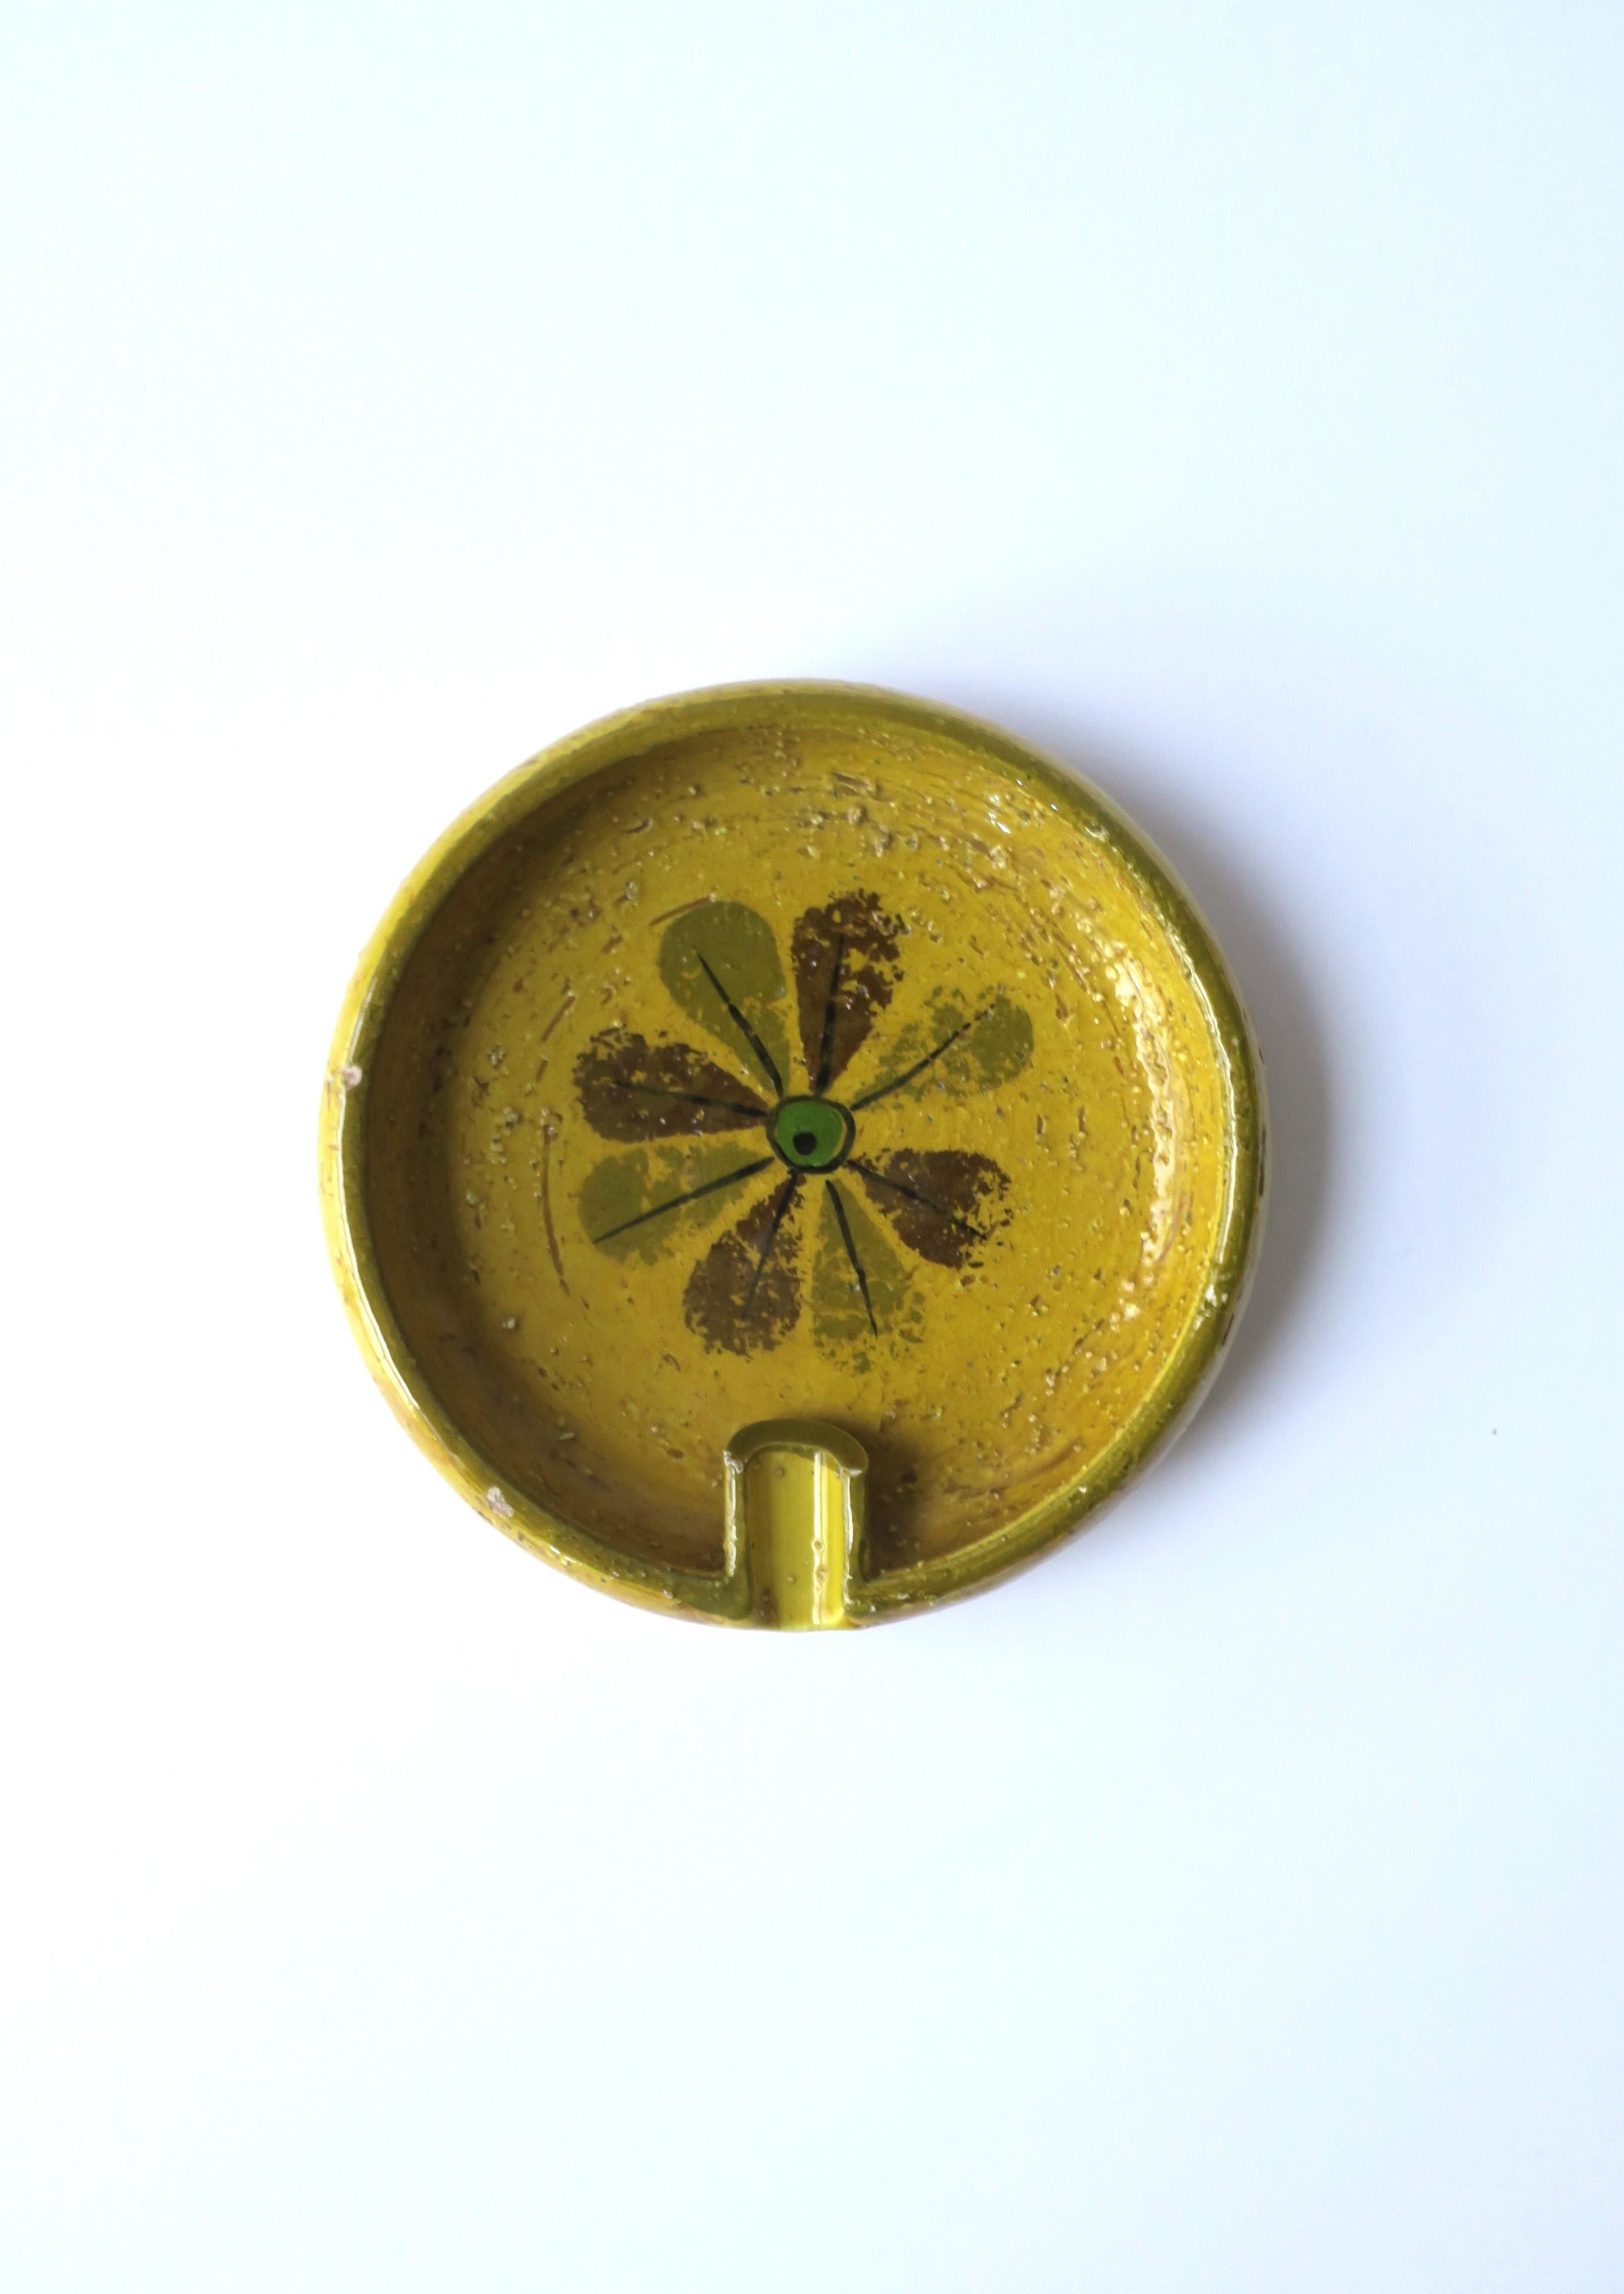 An Italian yellow pottery ashtray with flower center and lip for cigarette, Mid-Century Modern Italian period, circa mid-20th century, Italy. Pottery ashtray is yellow with flower design and an emerald green center. Piece is also being shown as a